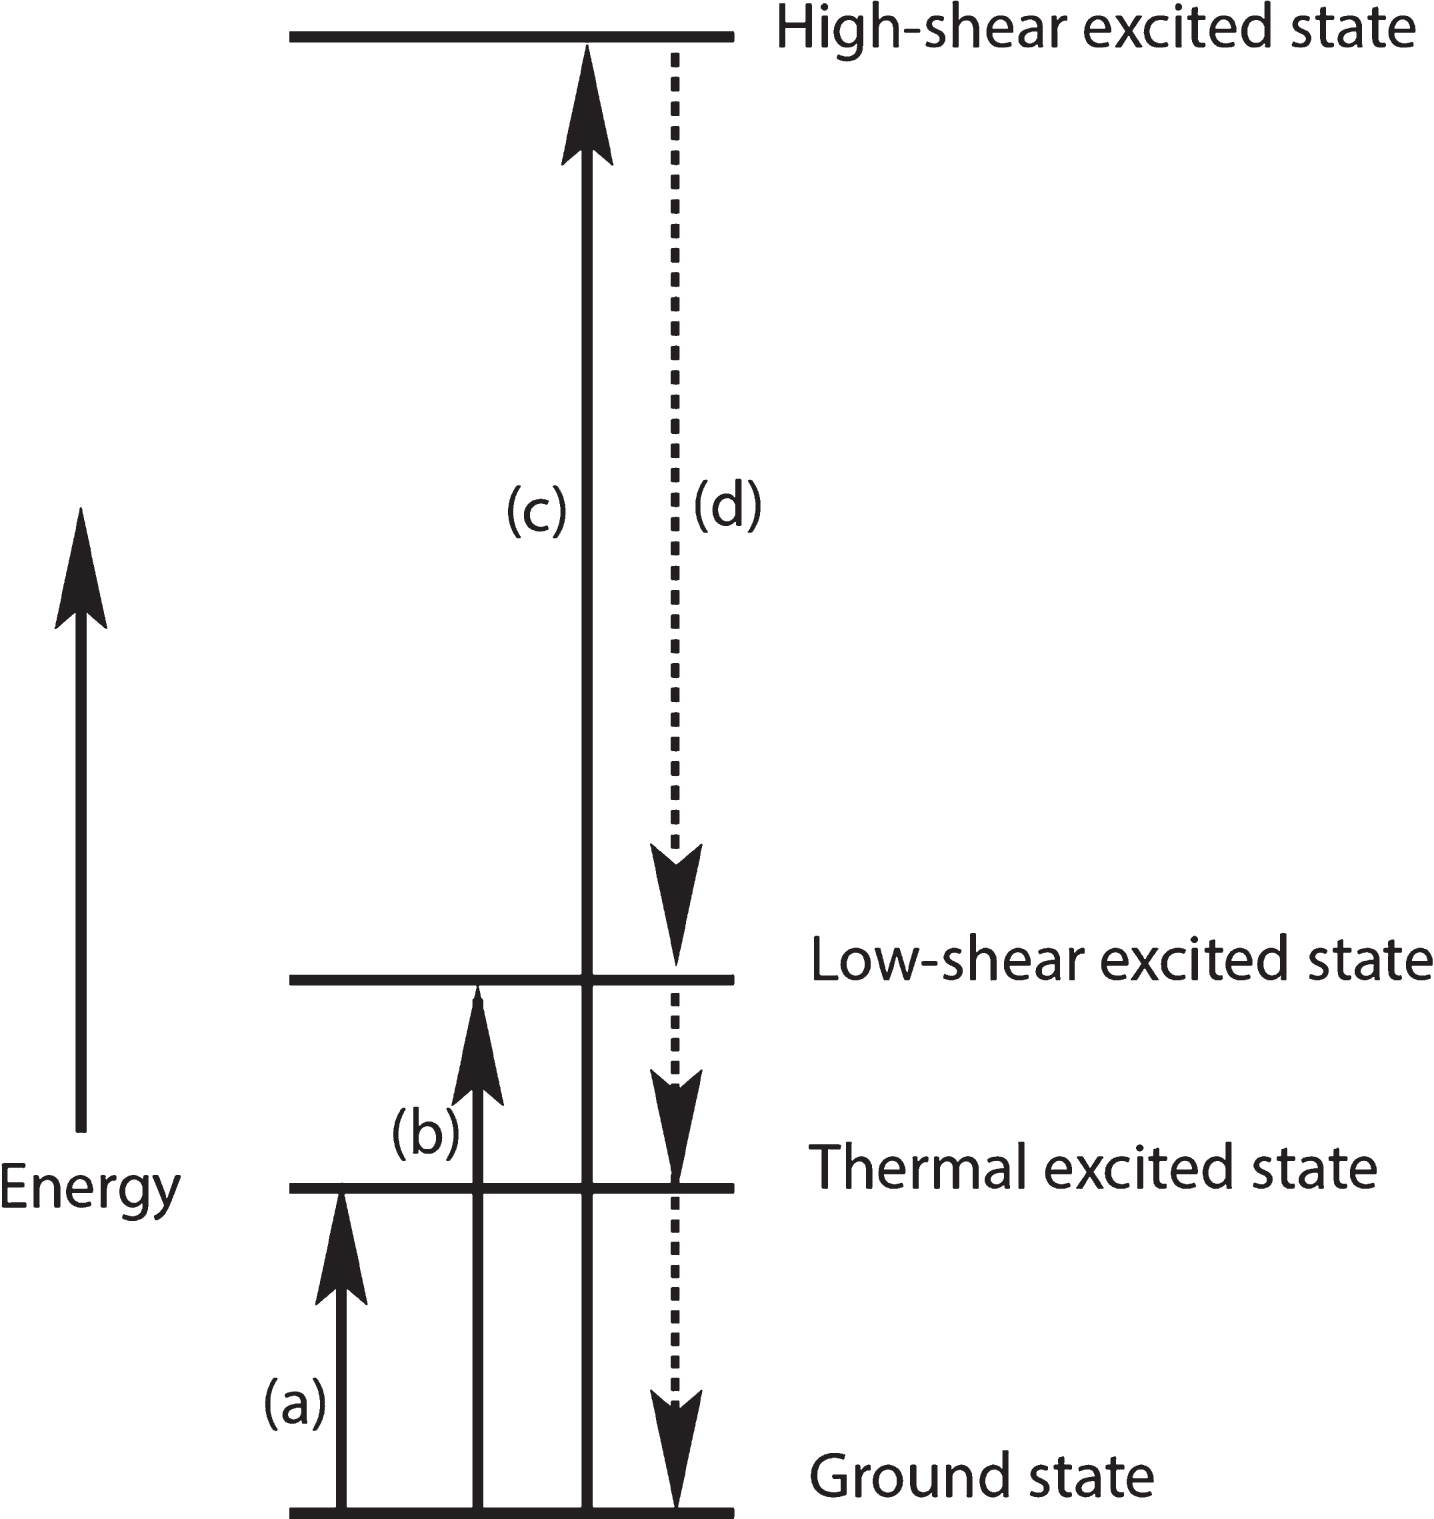 Greatly oversimplified diagram of thermal and shear events that add energy to an amyloid monomer followed by thermal energy transfer to the surroundings. Dashed lines indicate uncertainty about the rate and timing of this energy loss.